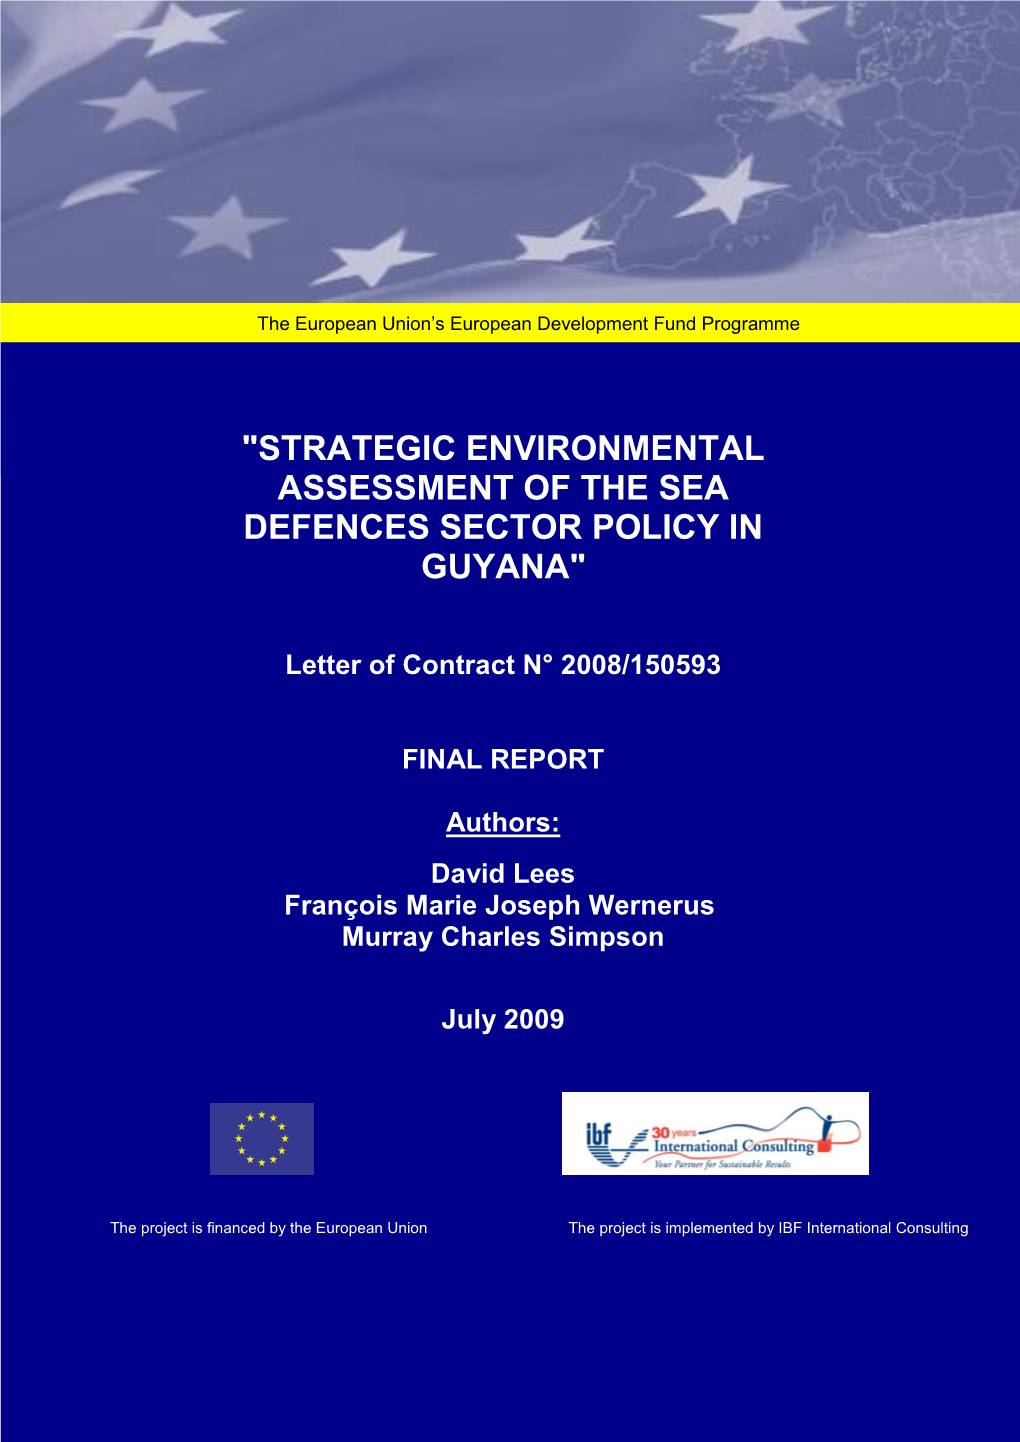 Strategic Environmental Assessment of the Sea Defences Sector Policy in Guyana"